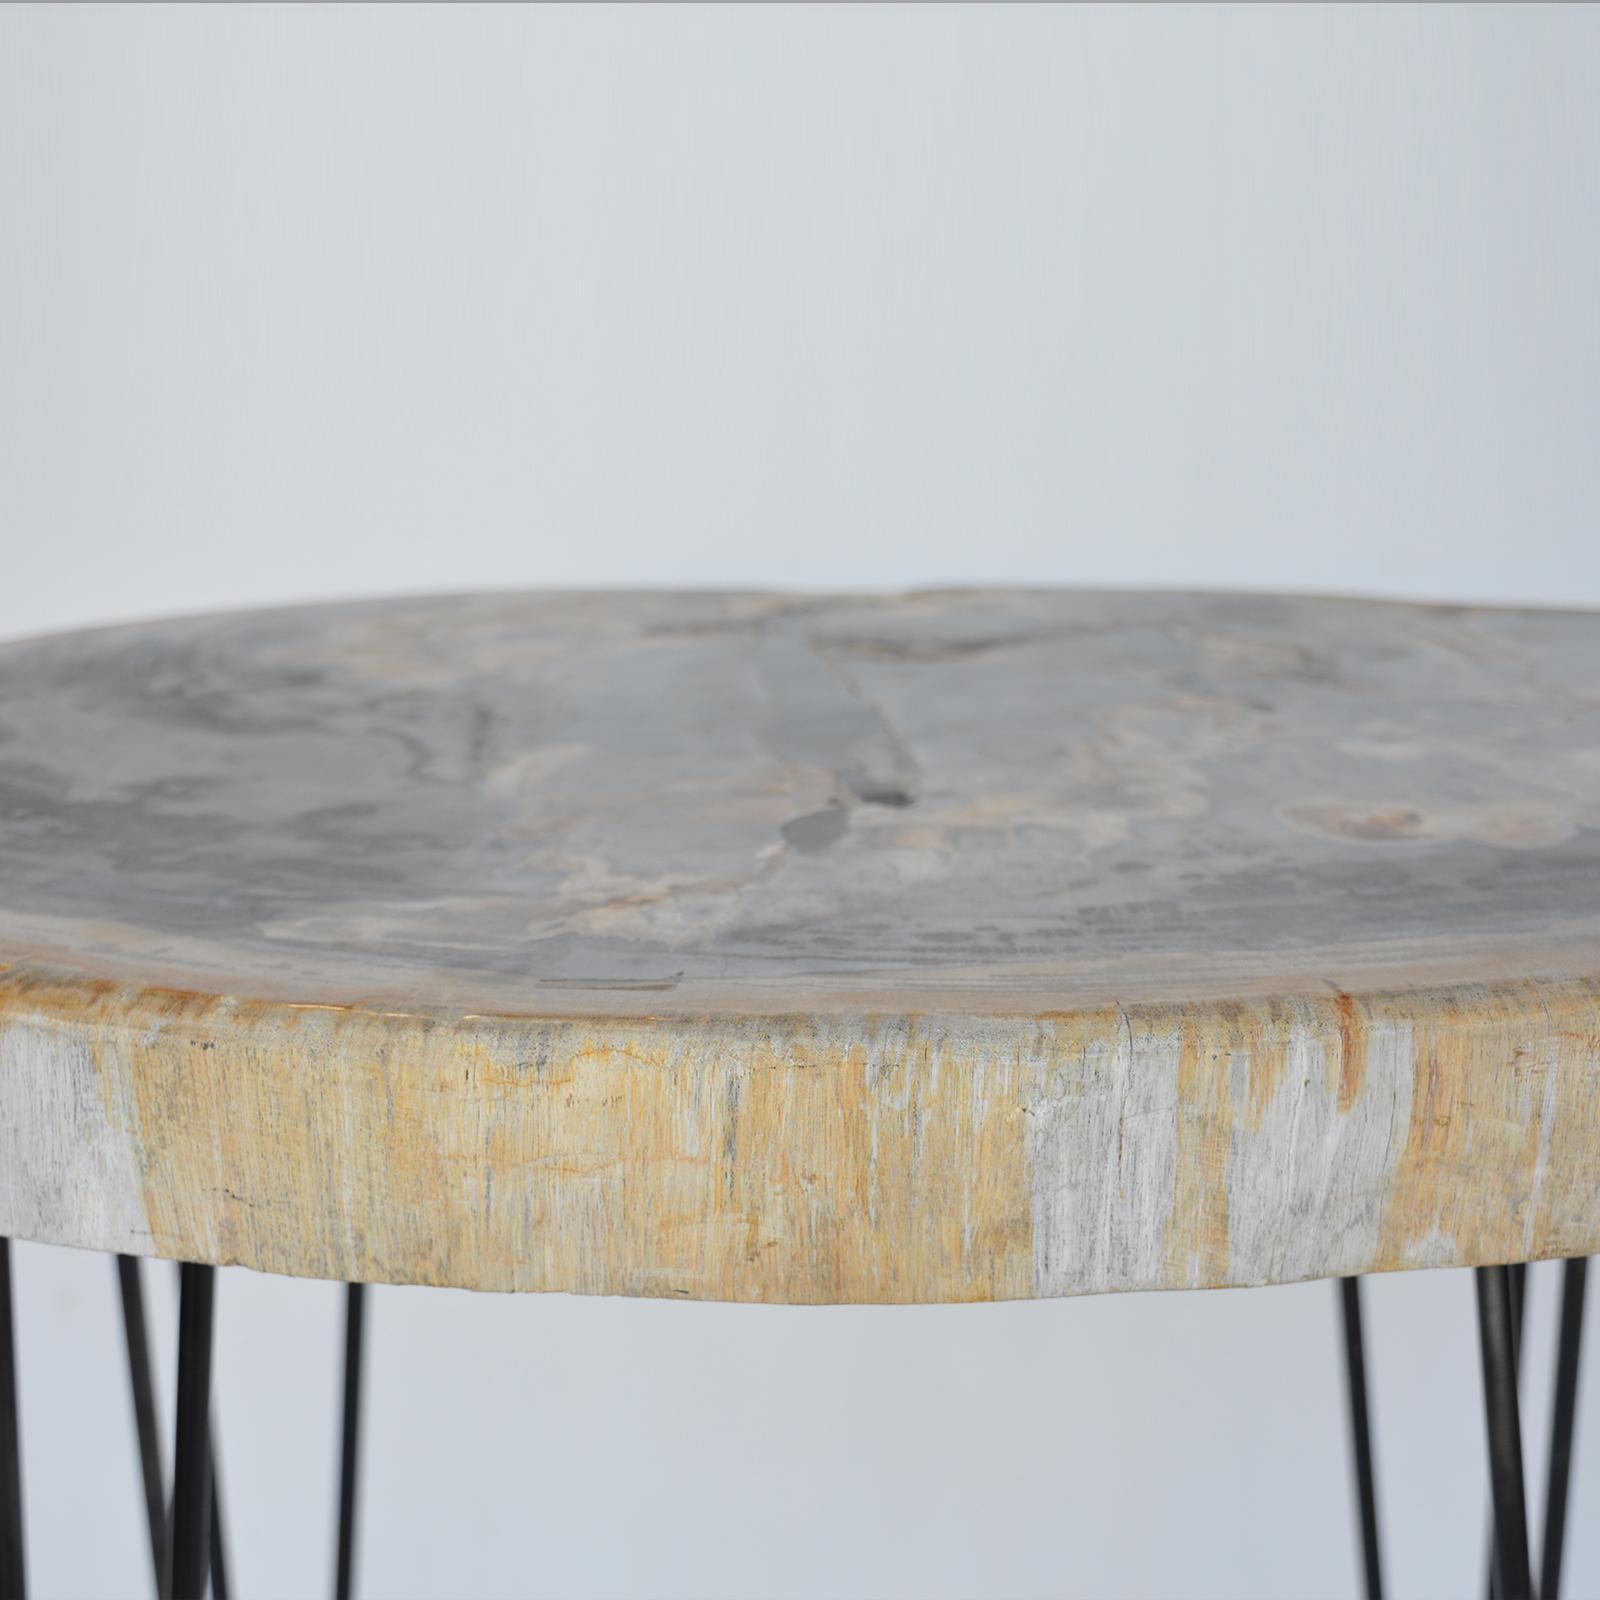 Pair of Petrified Wood Side Tables with Iron Feet, Late 20th Century  In Good Condition For Sale In Los Angeles, CA